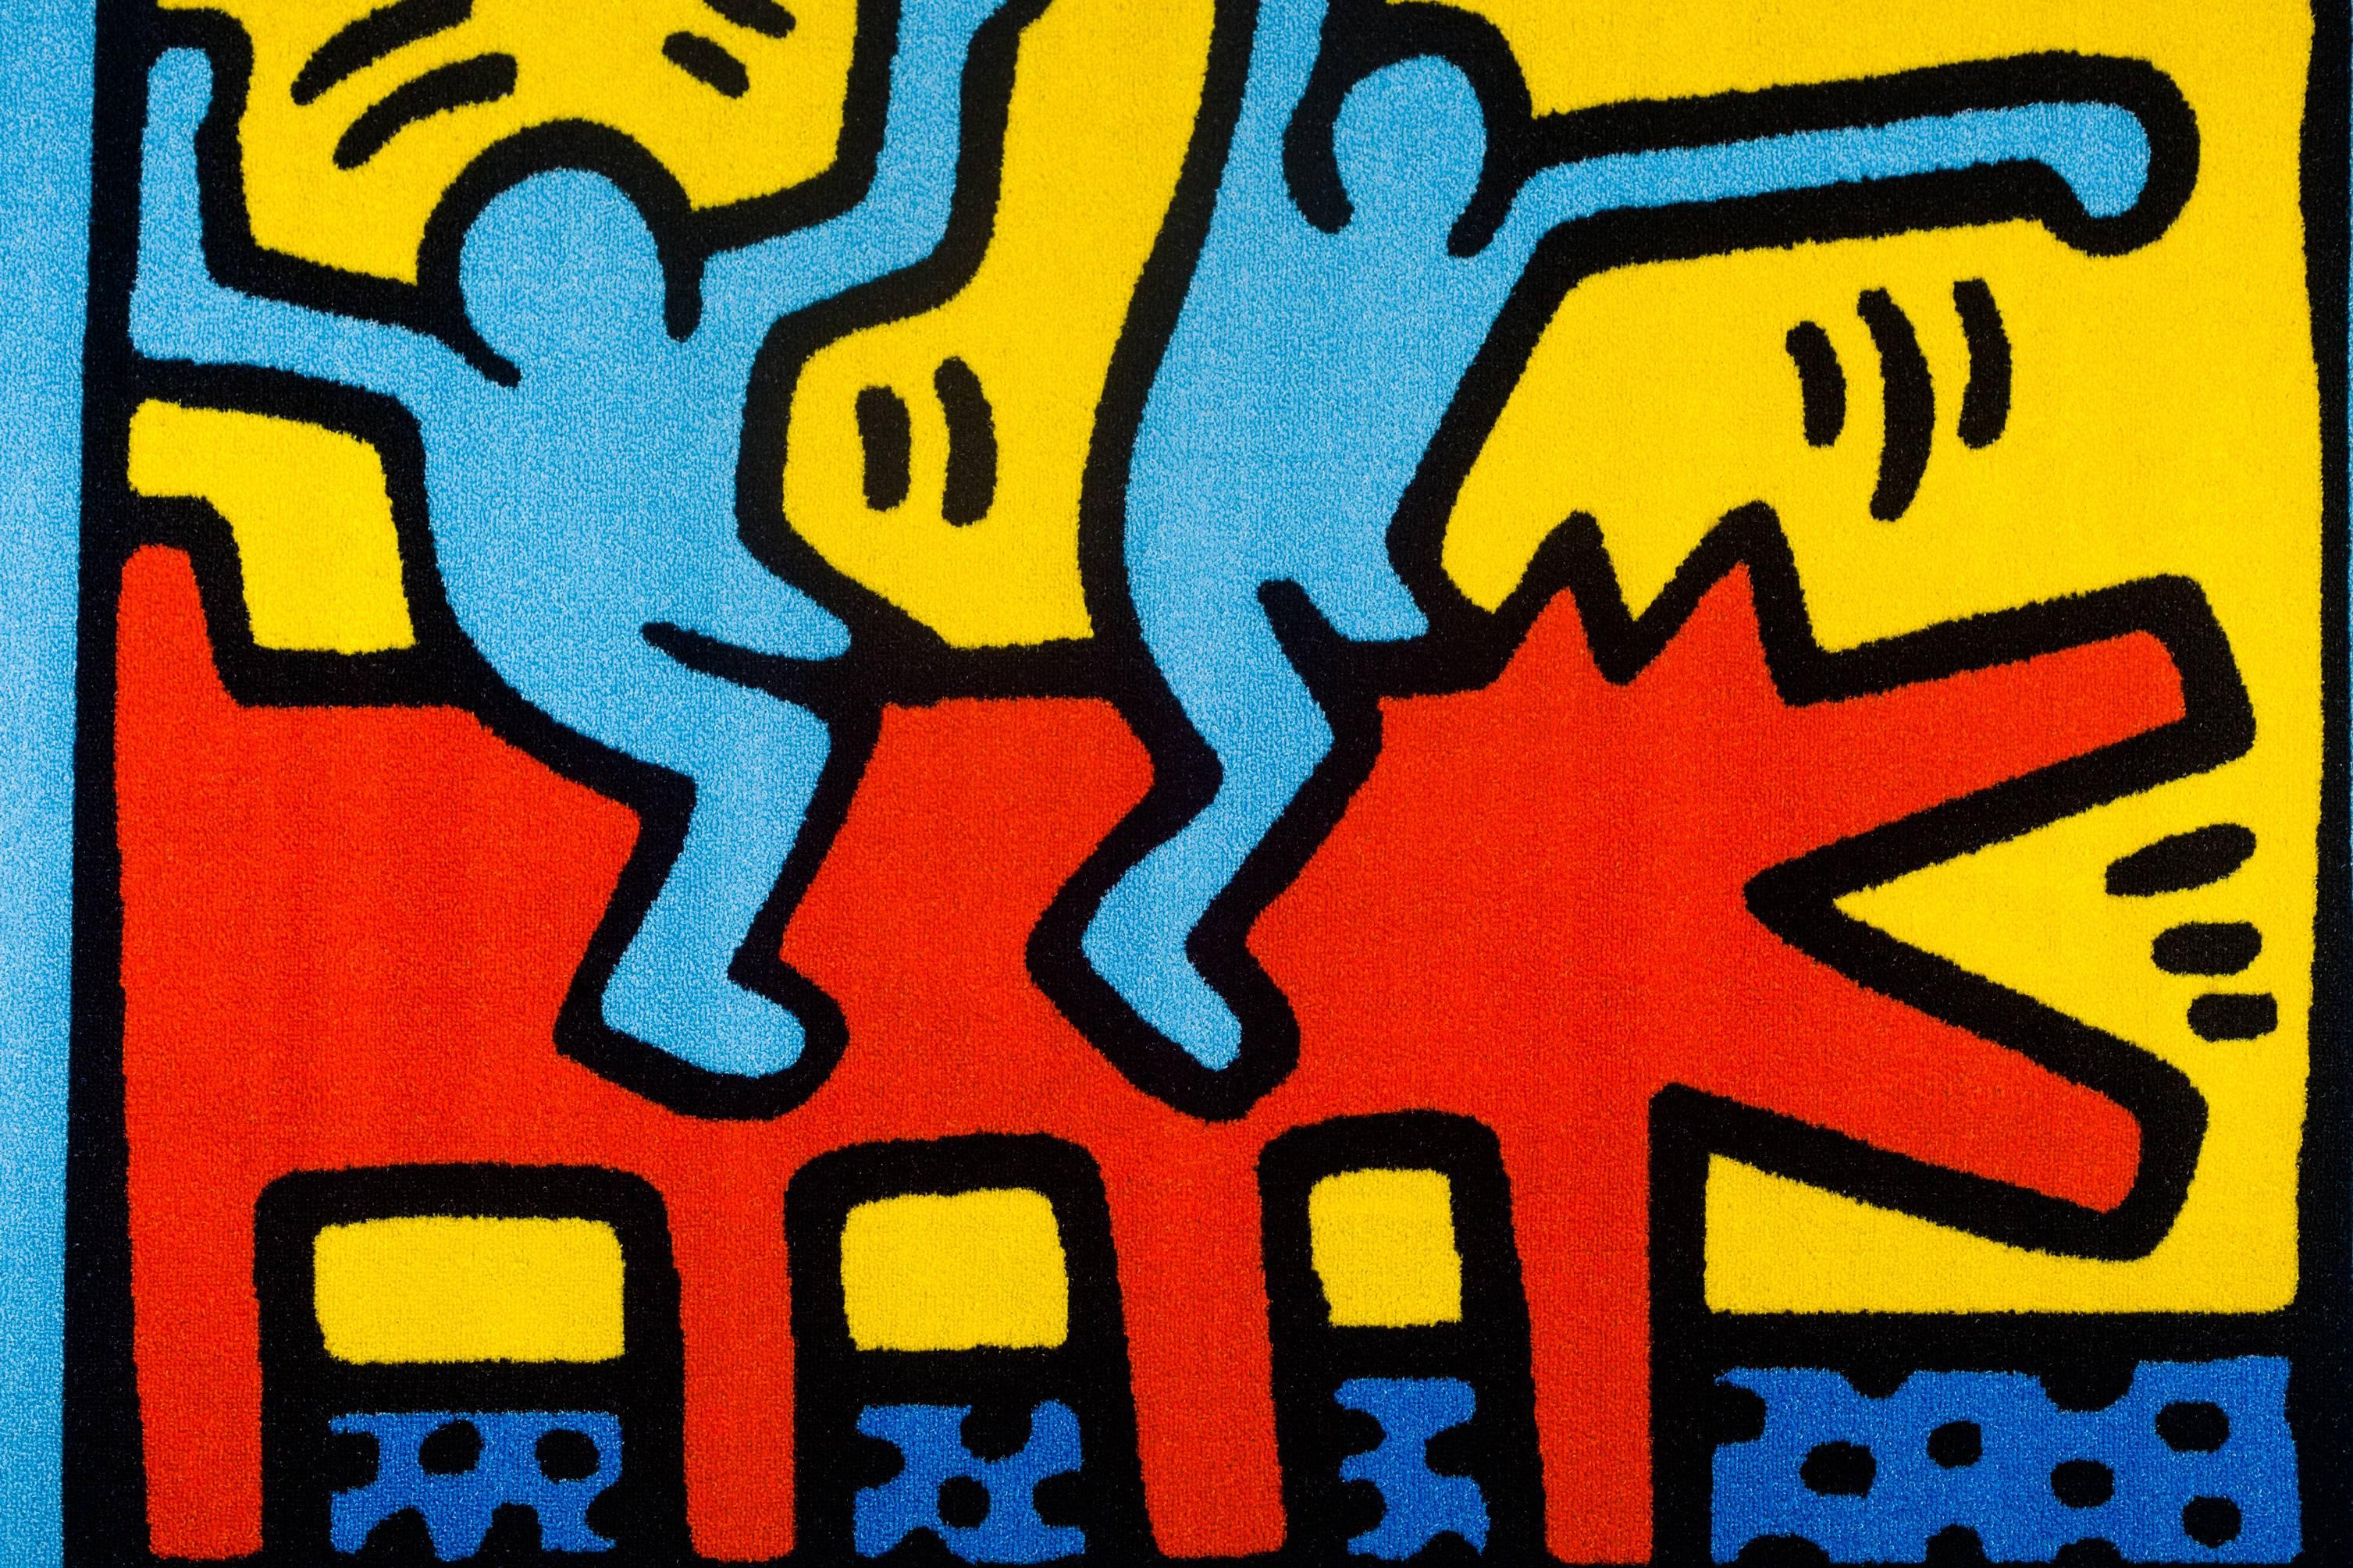 Brilliant colors on this large, 40 x 60 inches after Keith Haring rug with two dancing figures on a dog, distributed by Comart, Italia. Copyright Keith Haring Foundation, licensed by Artestar, New York. New old stock, in packaging. For anyone who